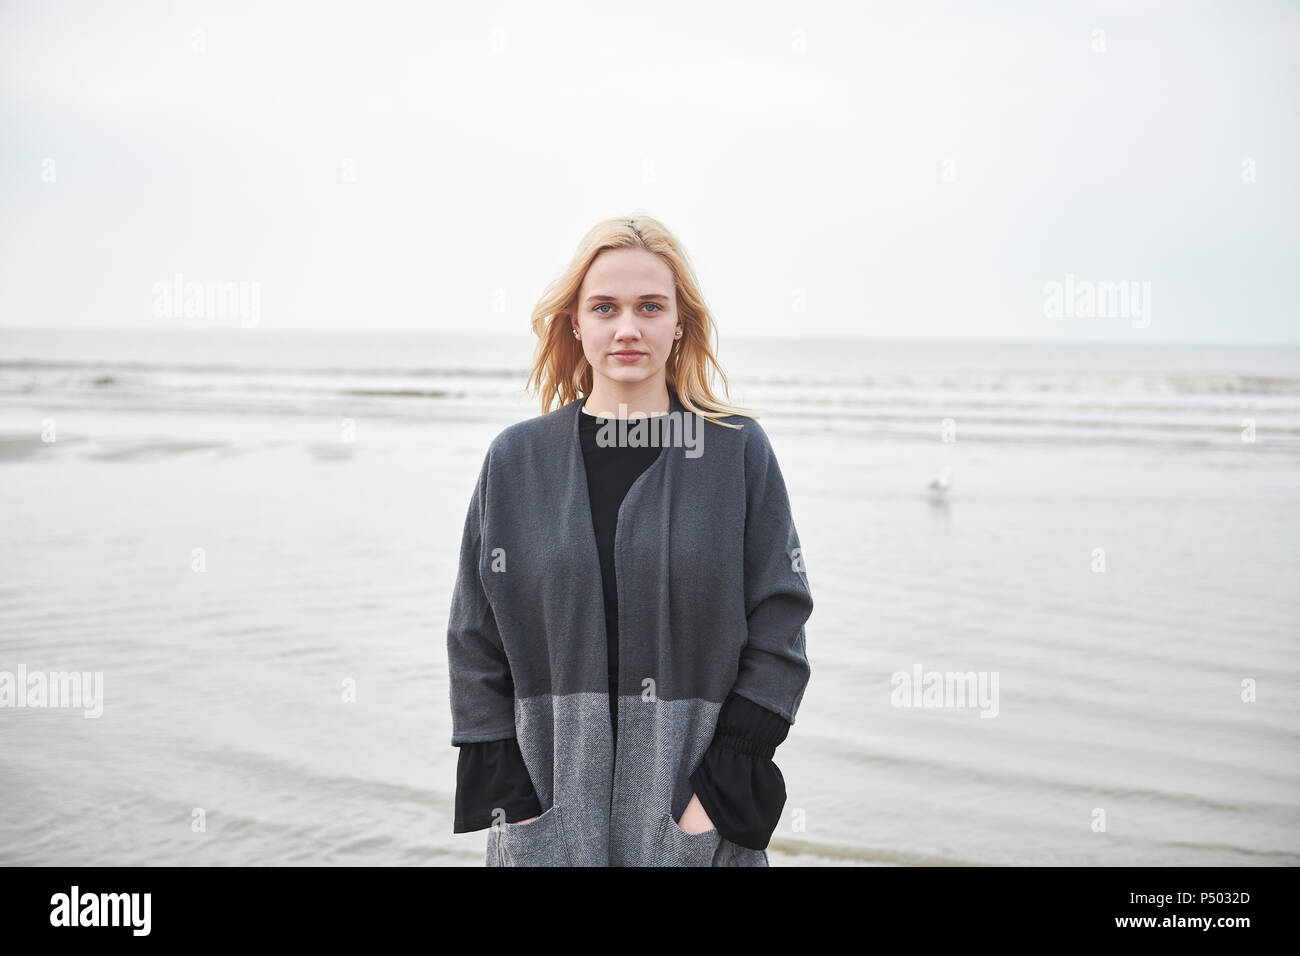 Netherlands, portrait of blond young woman on the beach Stock Photo